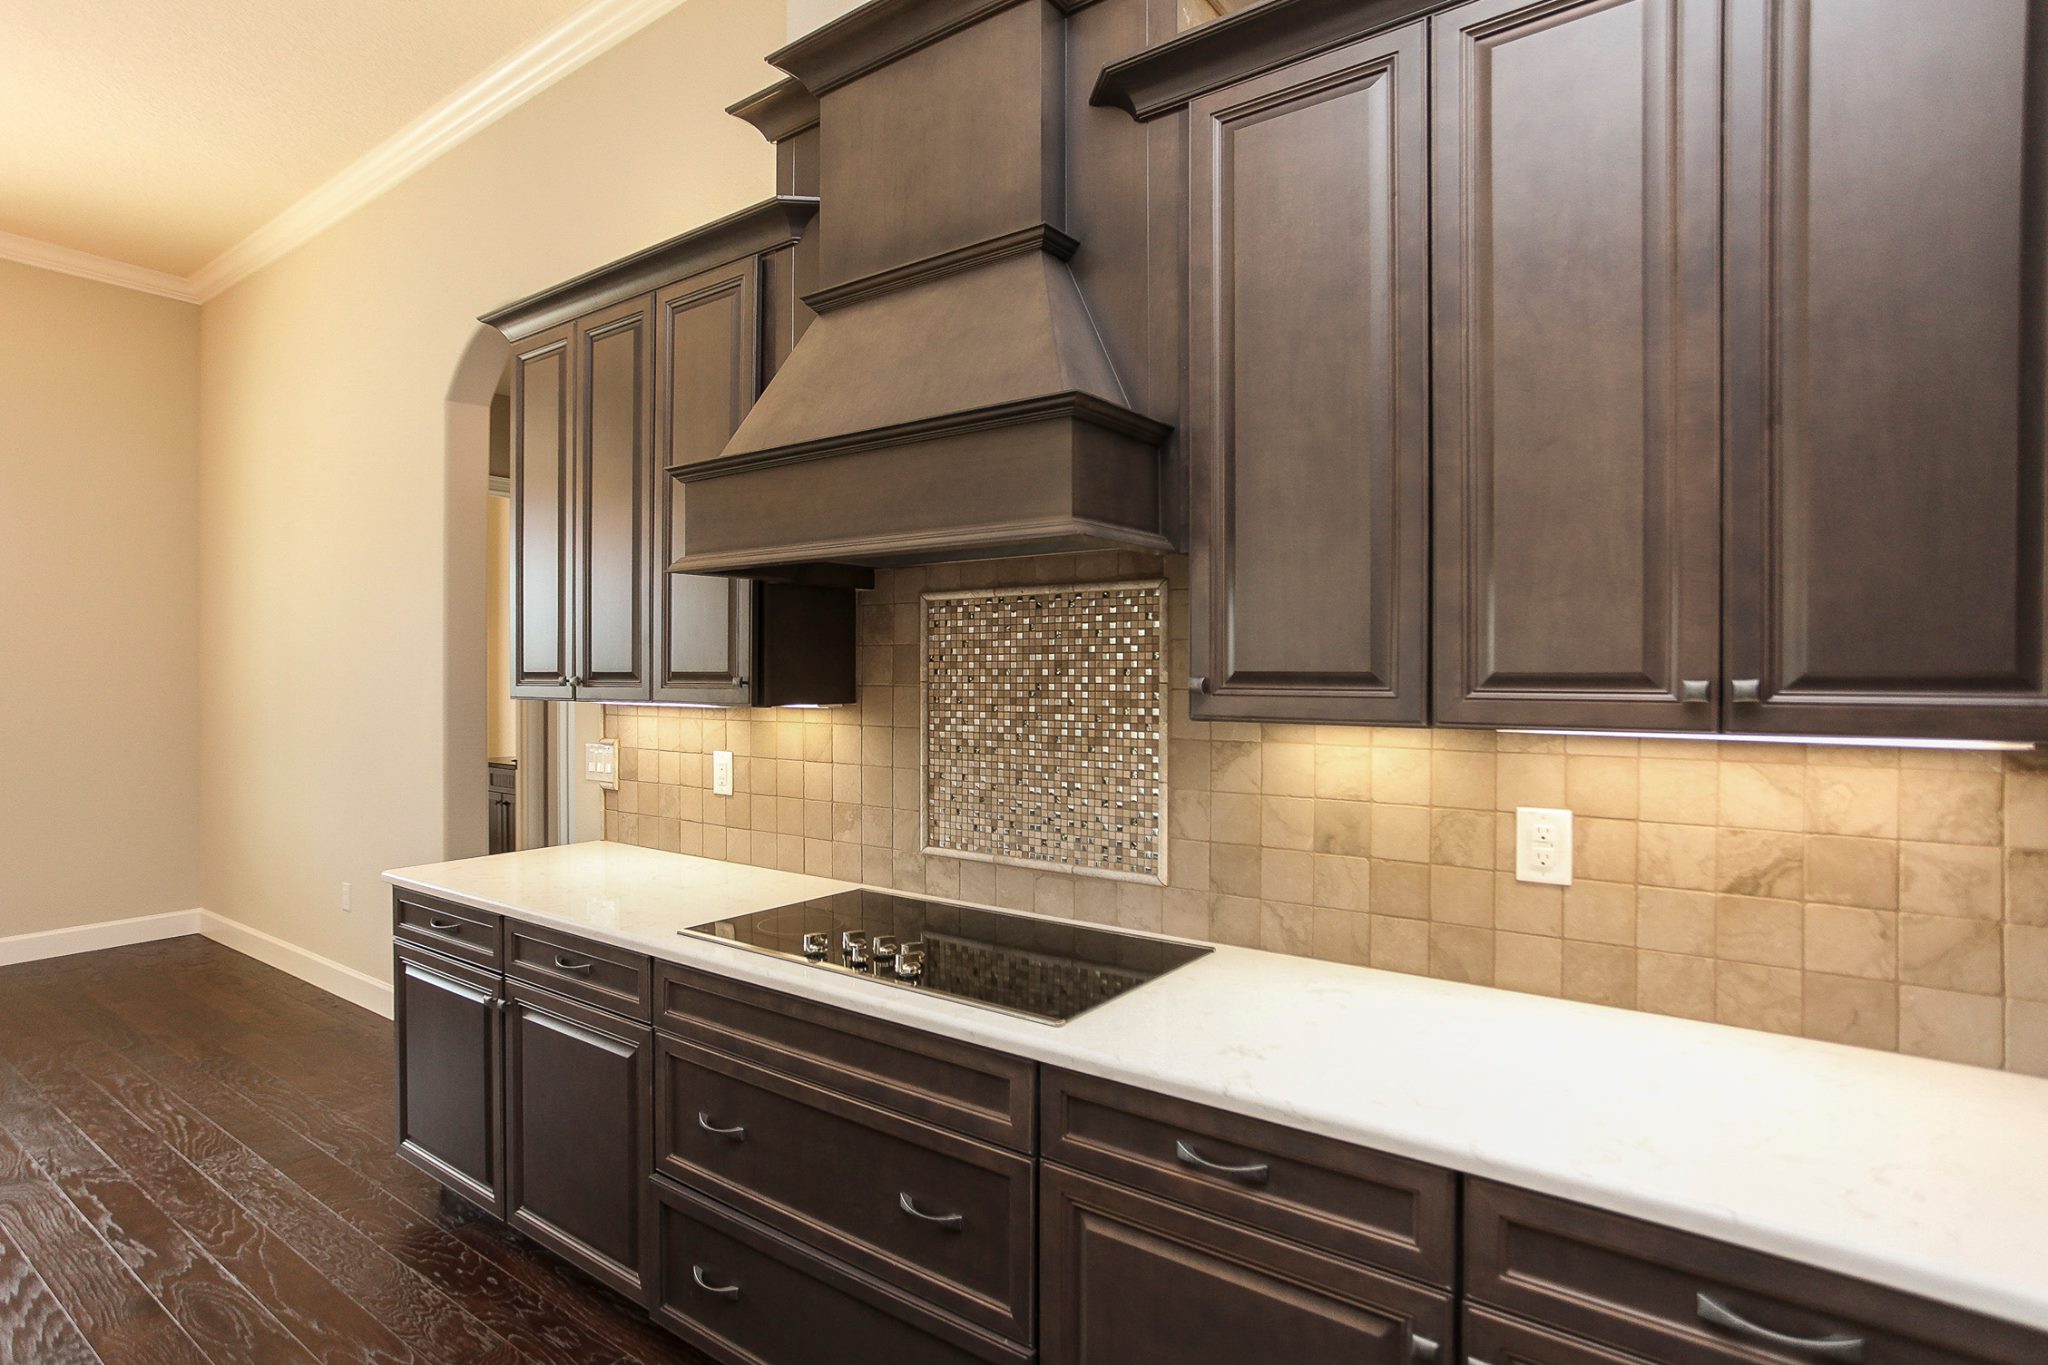 New Kitchen Construction With Marsh Cabinets Stanisci Hood And